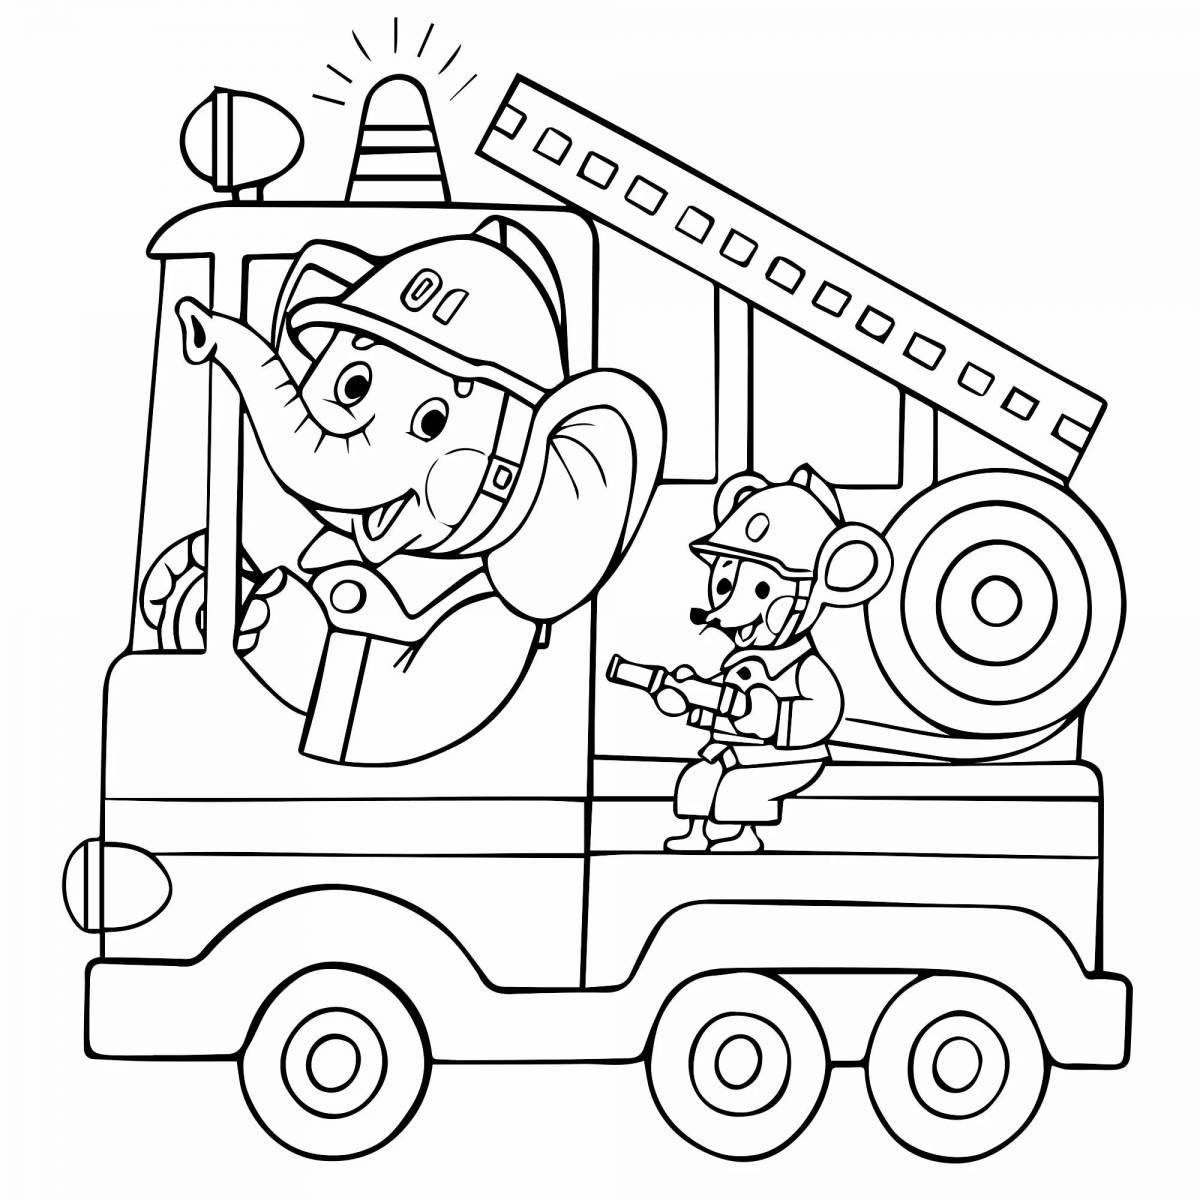 Incredible fire truck coloring book for kids 6-7 years old